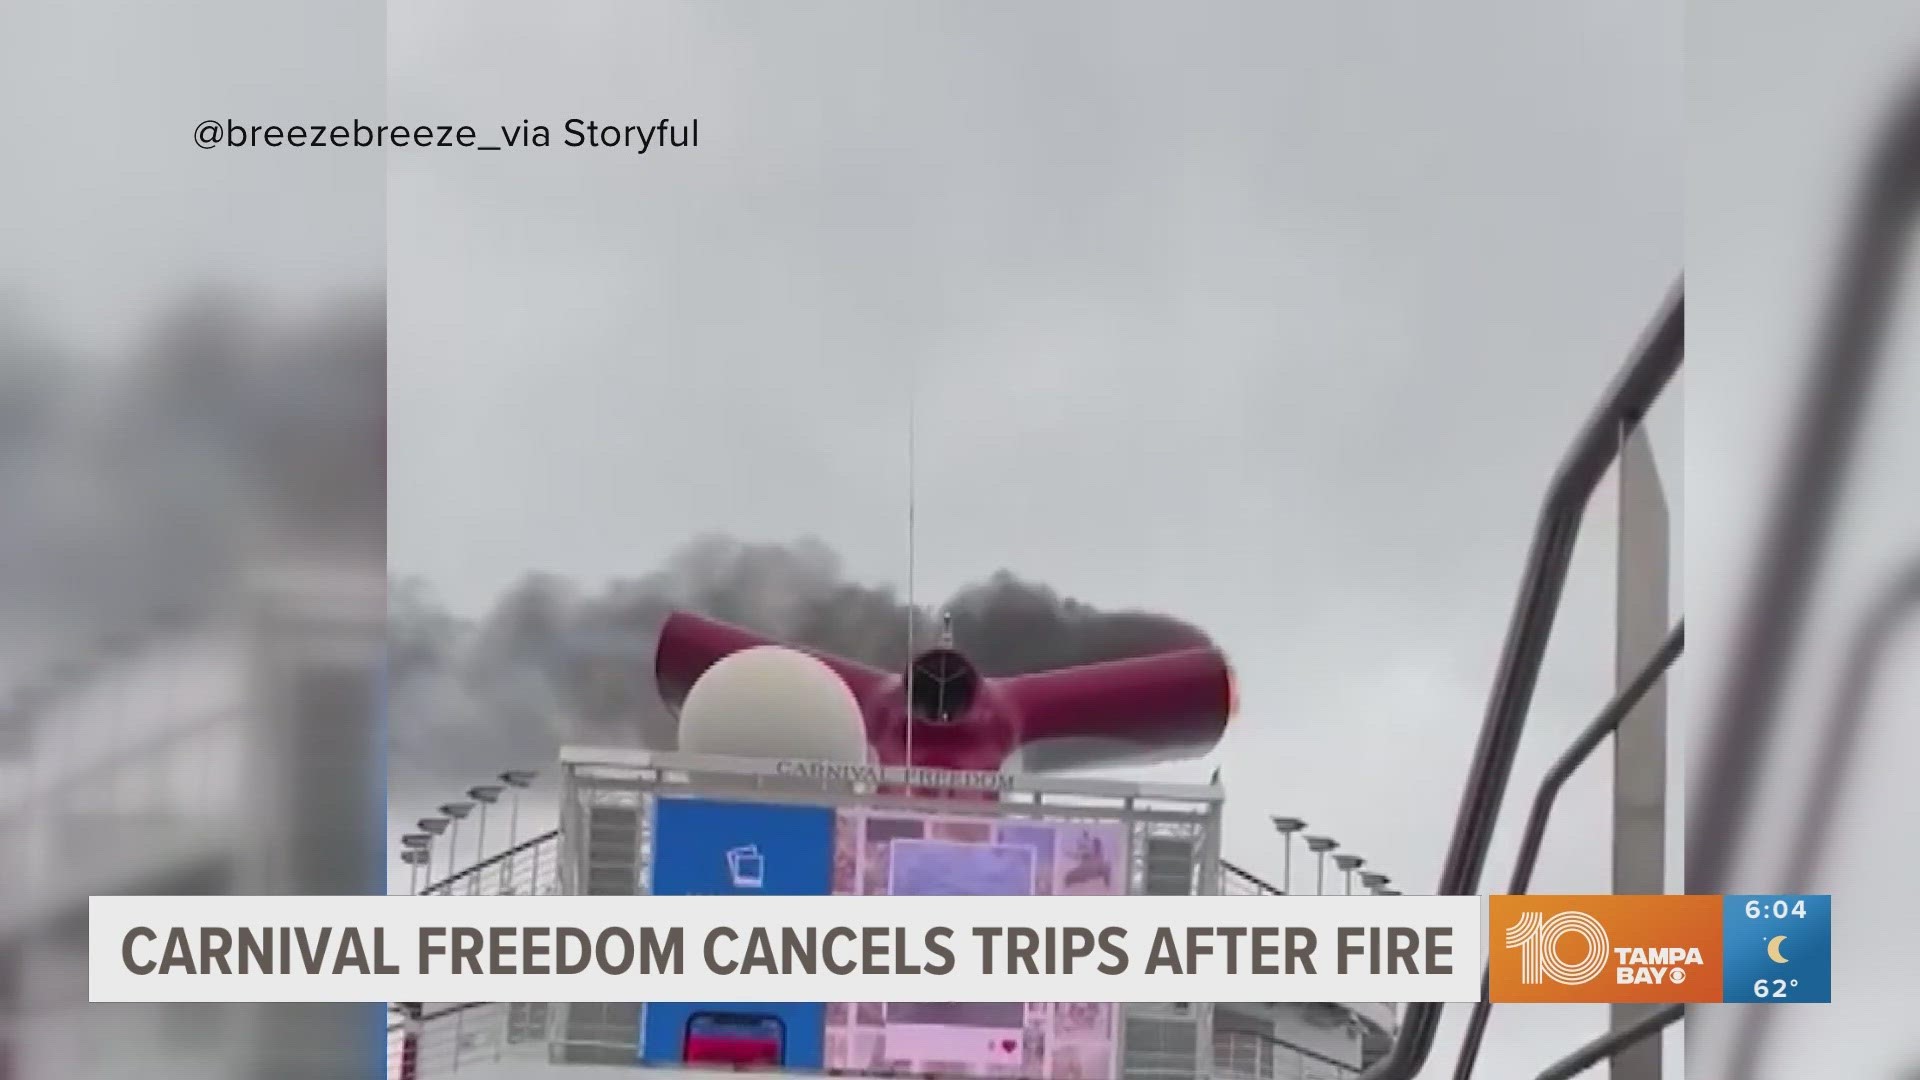 Flames on the ship's exhaust funnel were reported amid bad weather near the Bahamas.